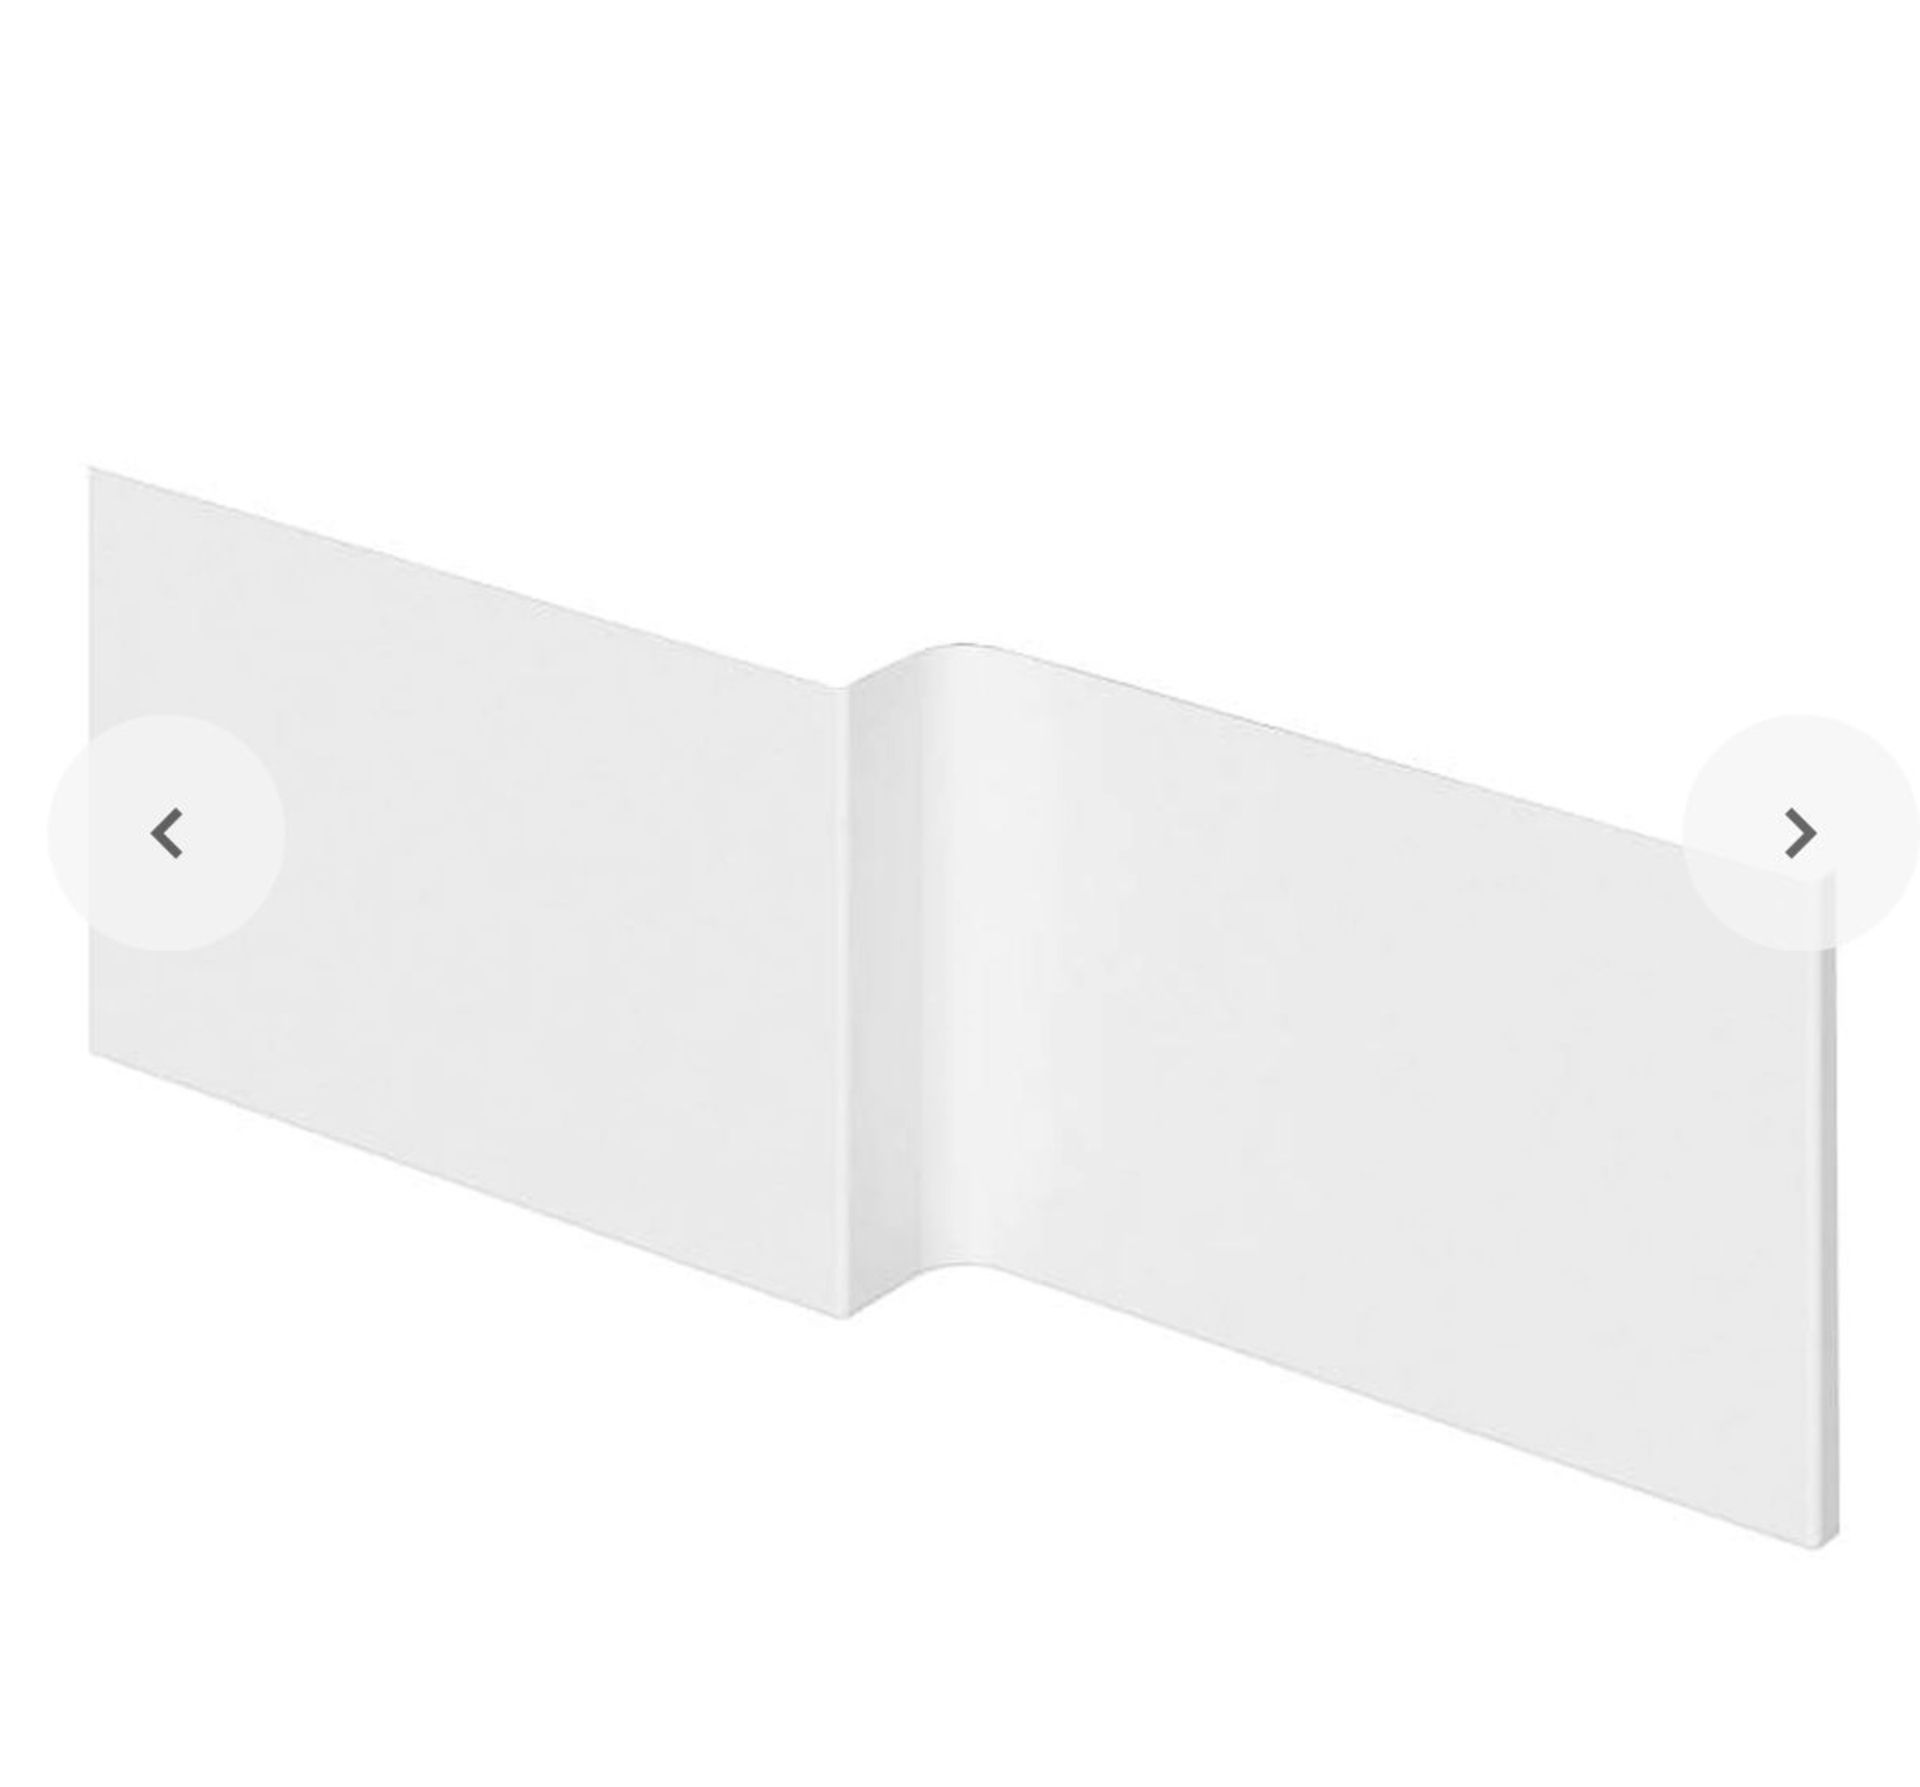 WHITE BATH UNIVERSAL D SHAPED BATH SIDE AND END PANEL - Image 3 of 3